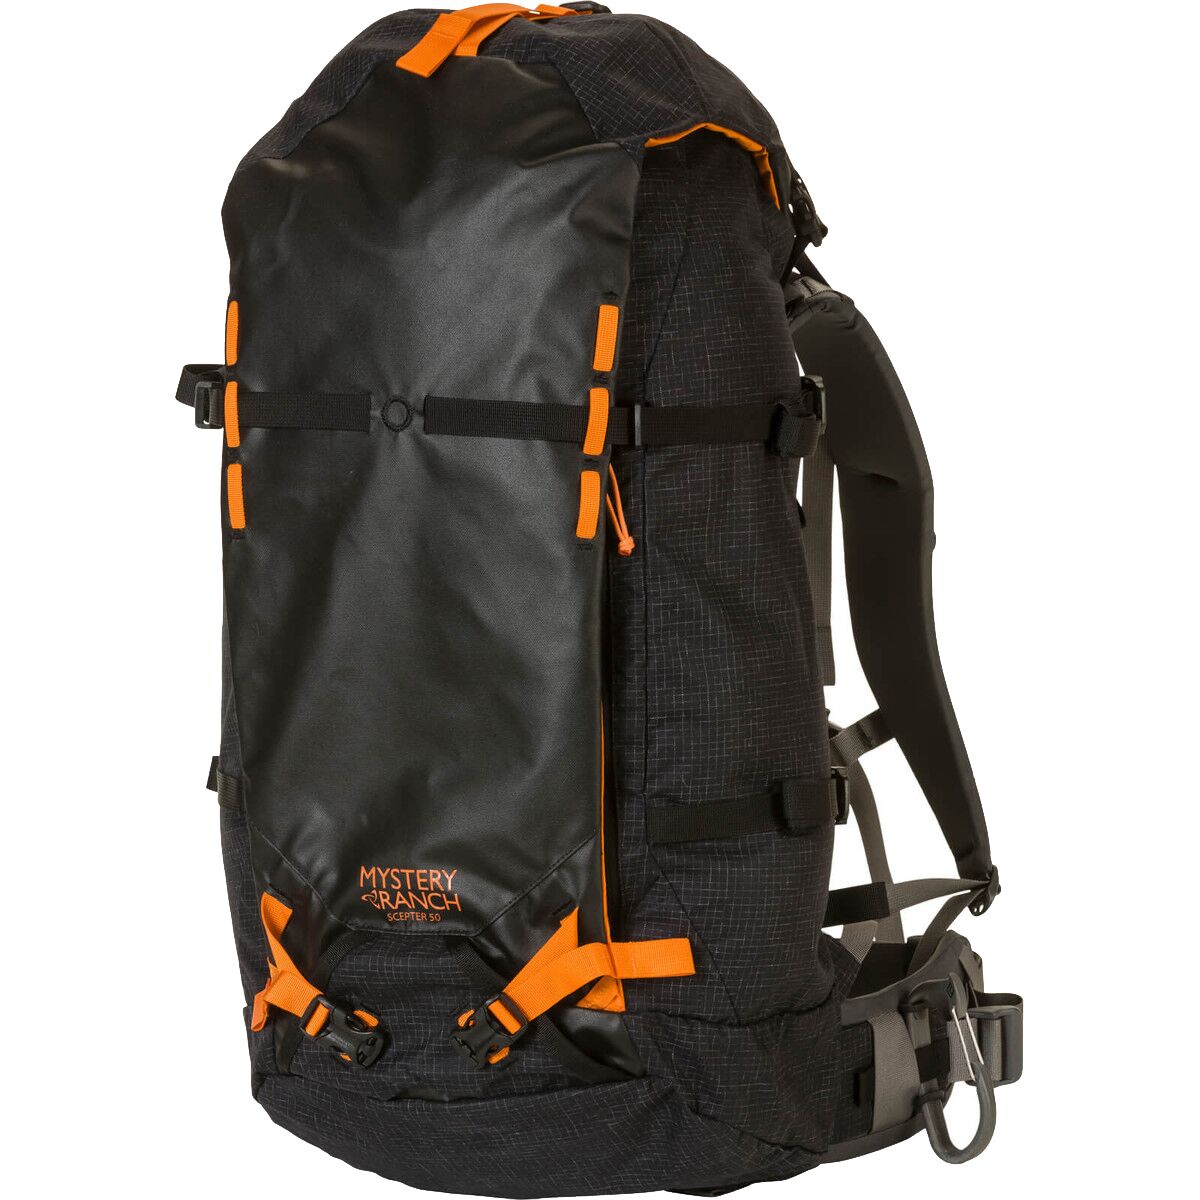 Mystery Ranch Scepter 50L Backpack